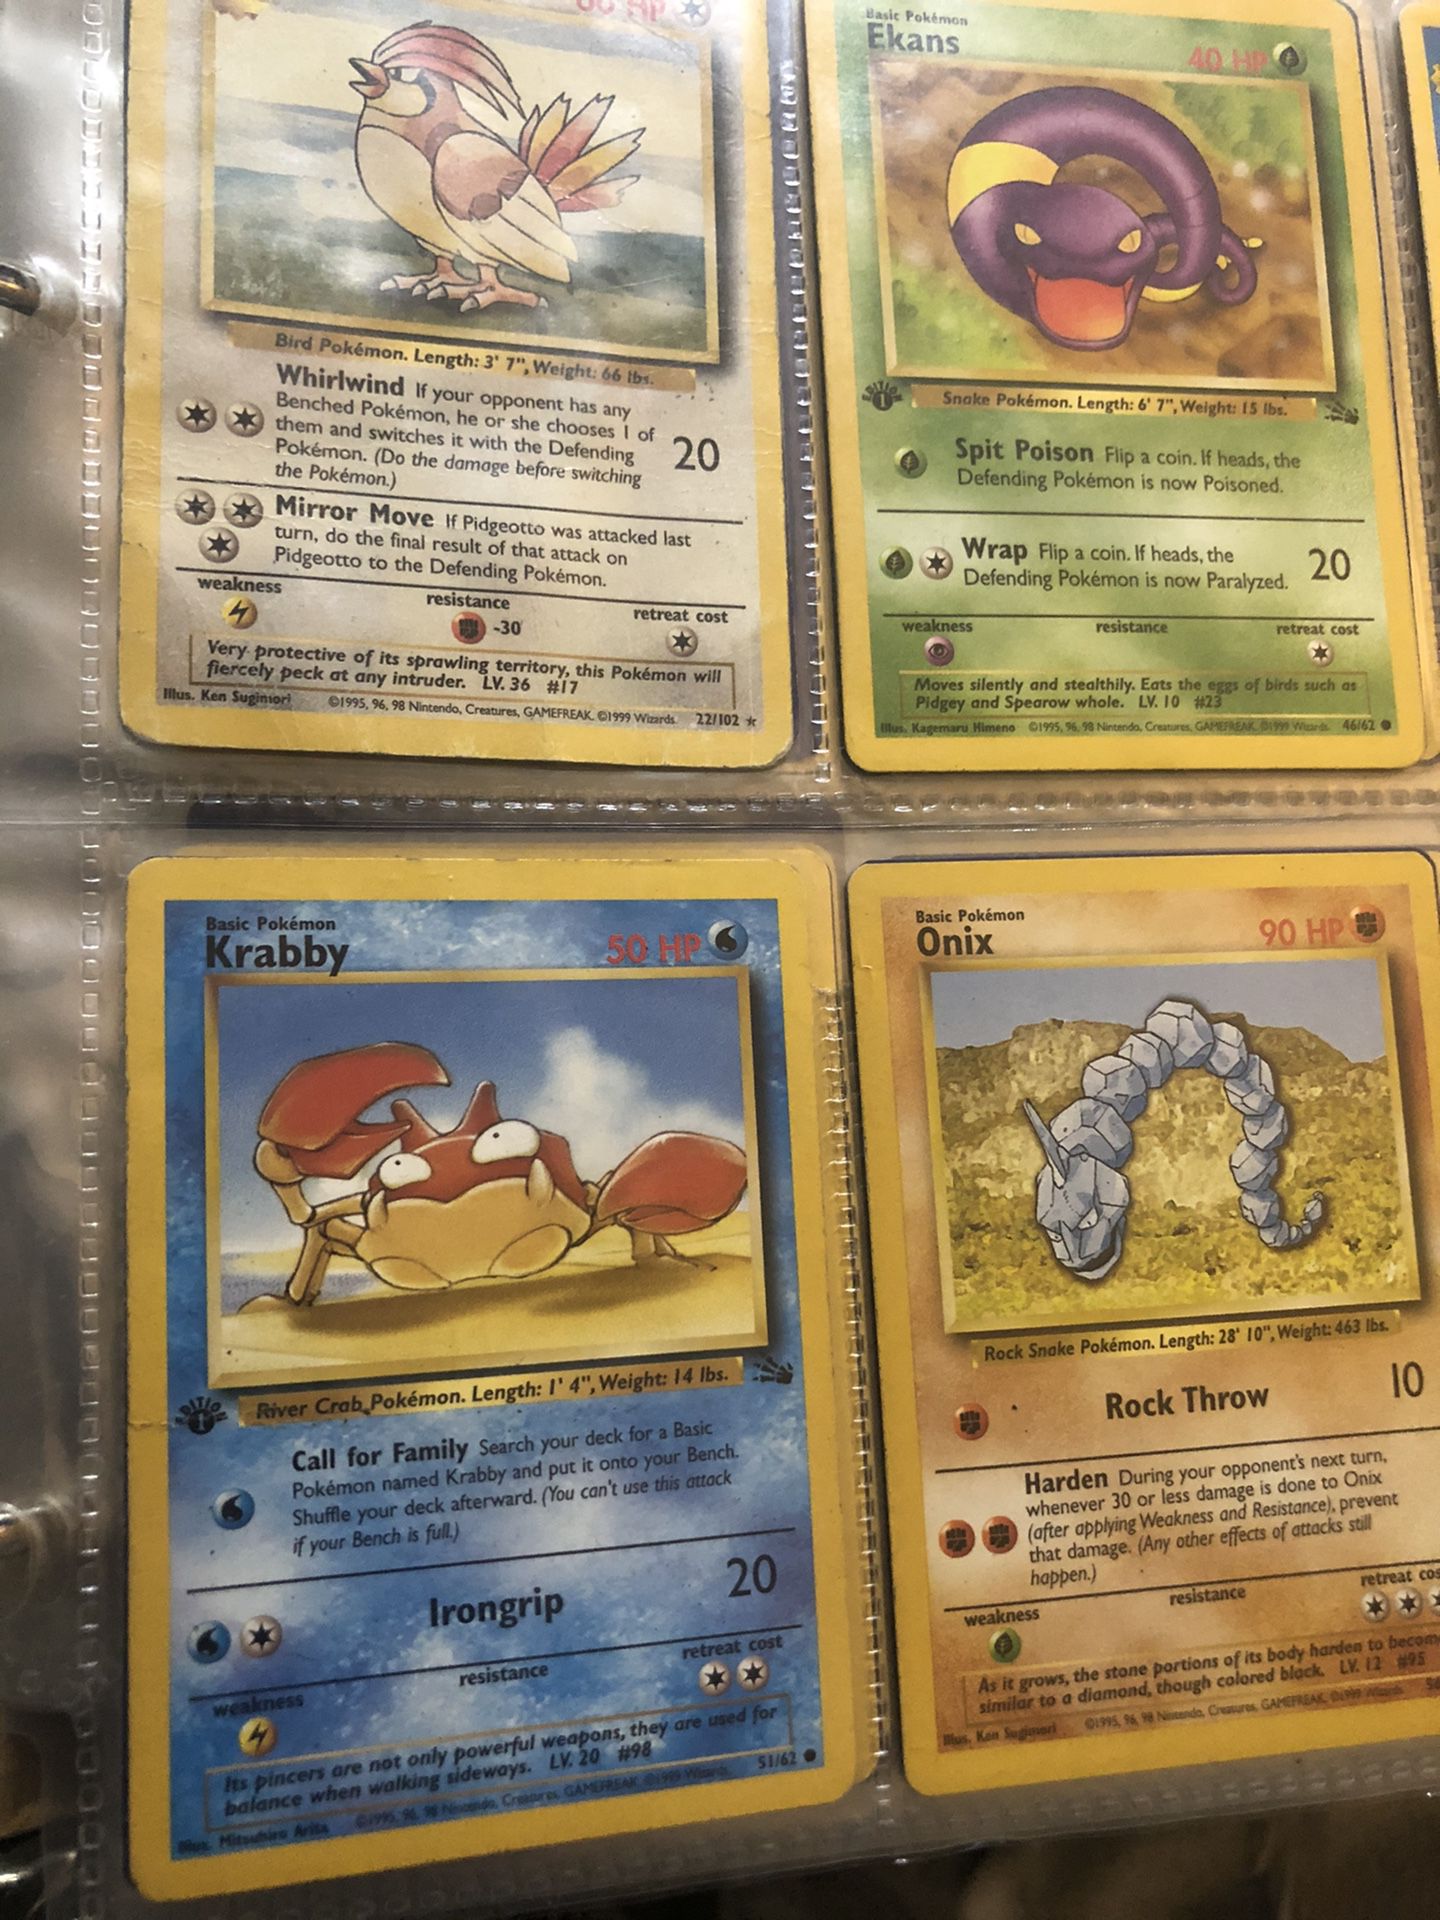 Pokemon cards from the 90s 1st edition, McD promo holos, neo Japanese from 90s etc.